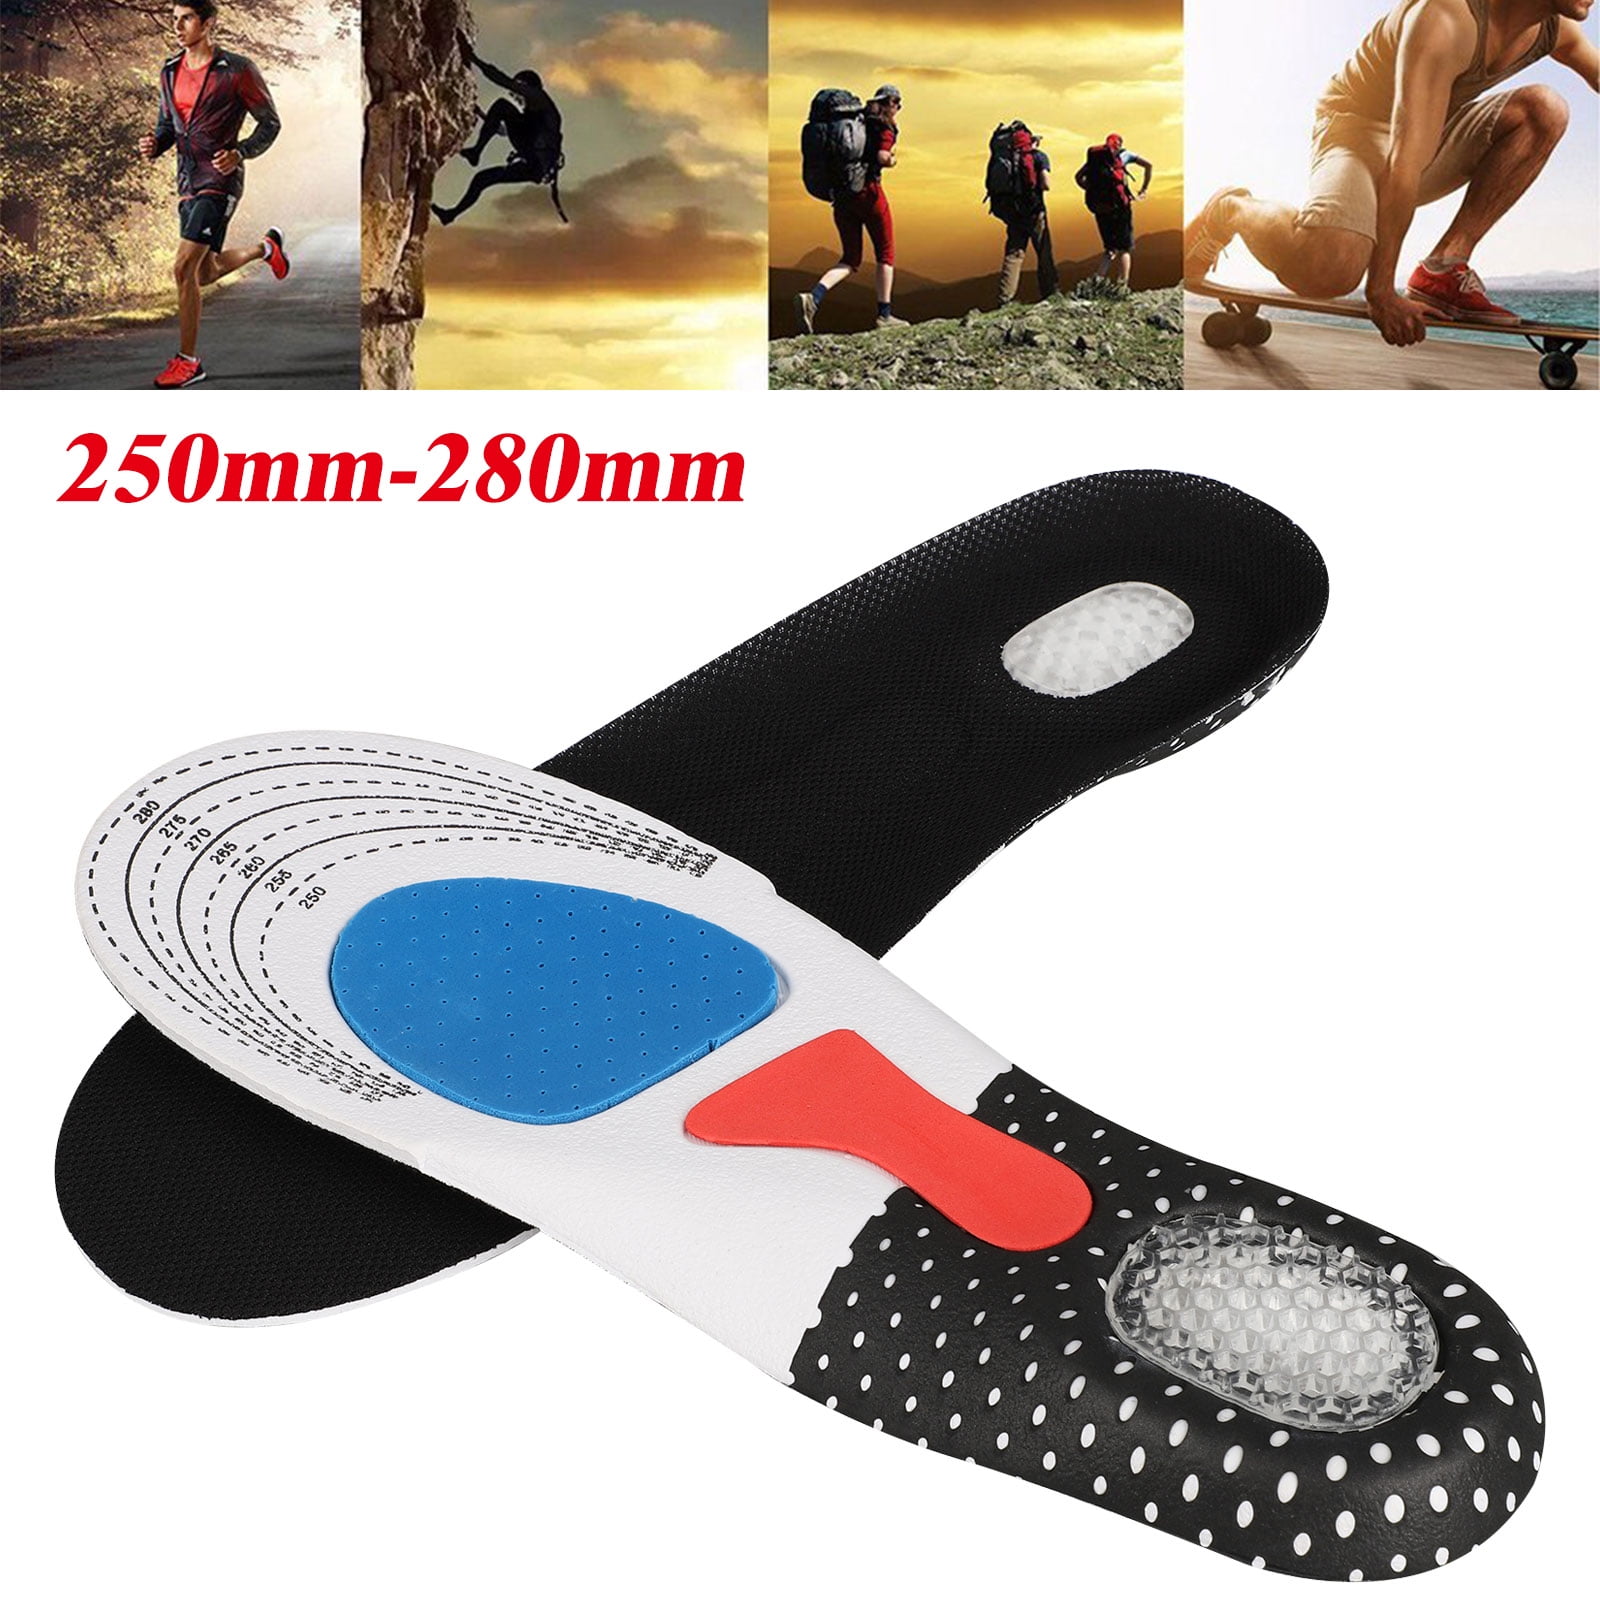 Top Gel Orthotic Sport Running Insoles Insert Shoe Pad Arch Support Heel Cushion 